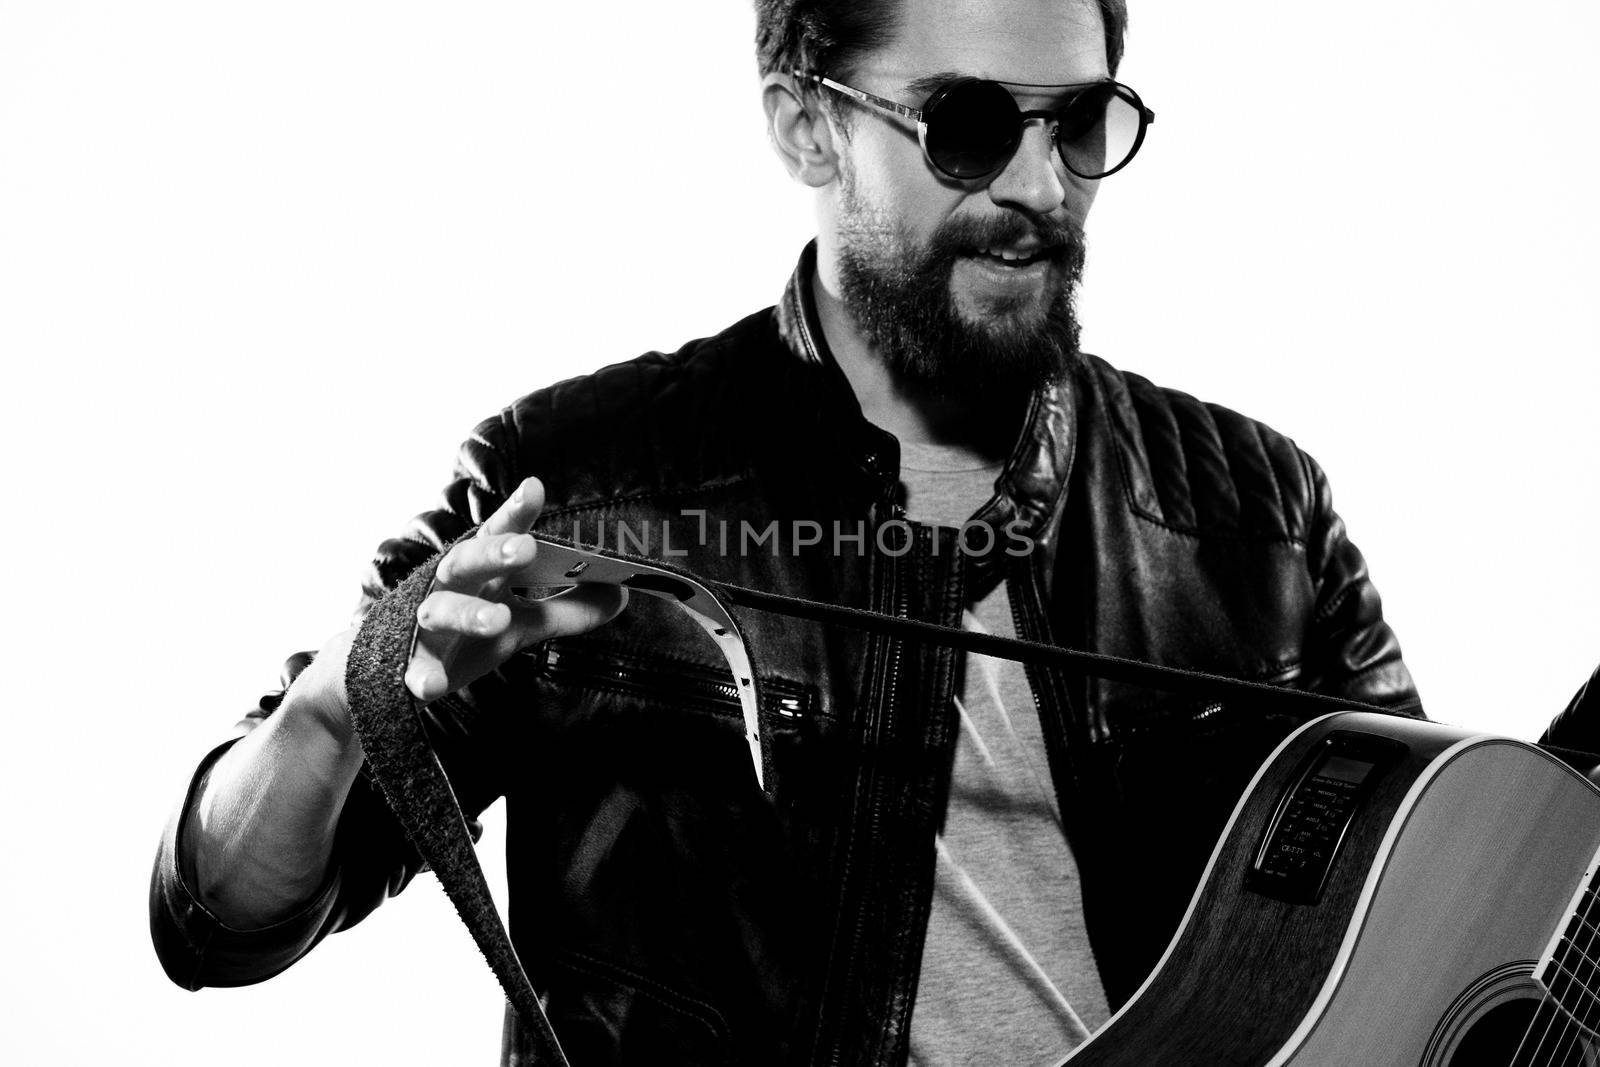 A man plays the guitar in a black leather jacket with sunglasses on a light background by SHOTPRIME